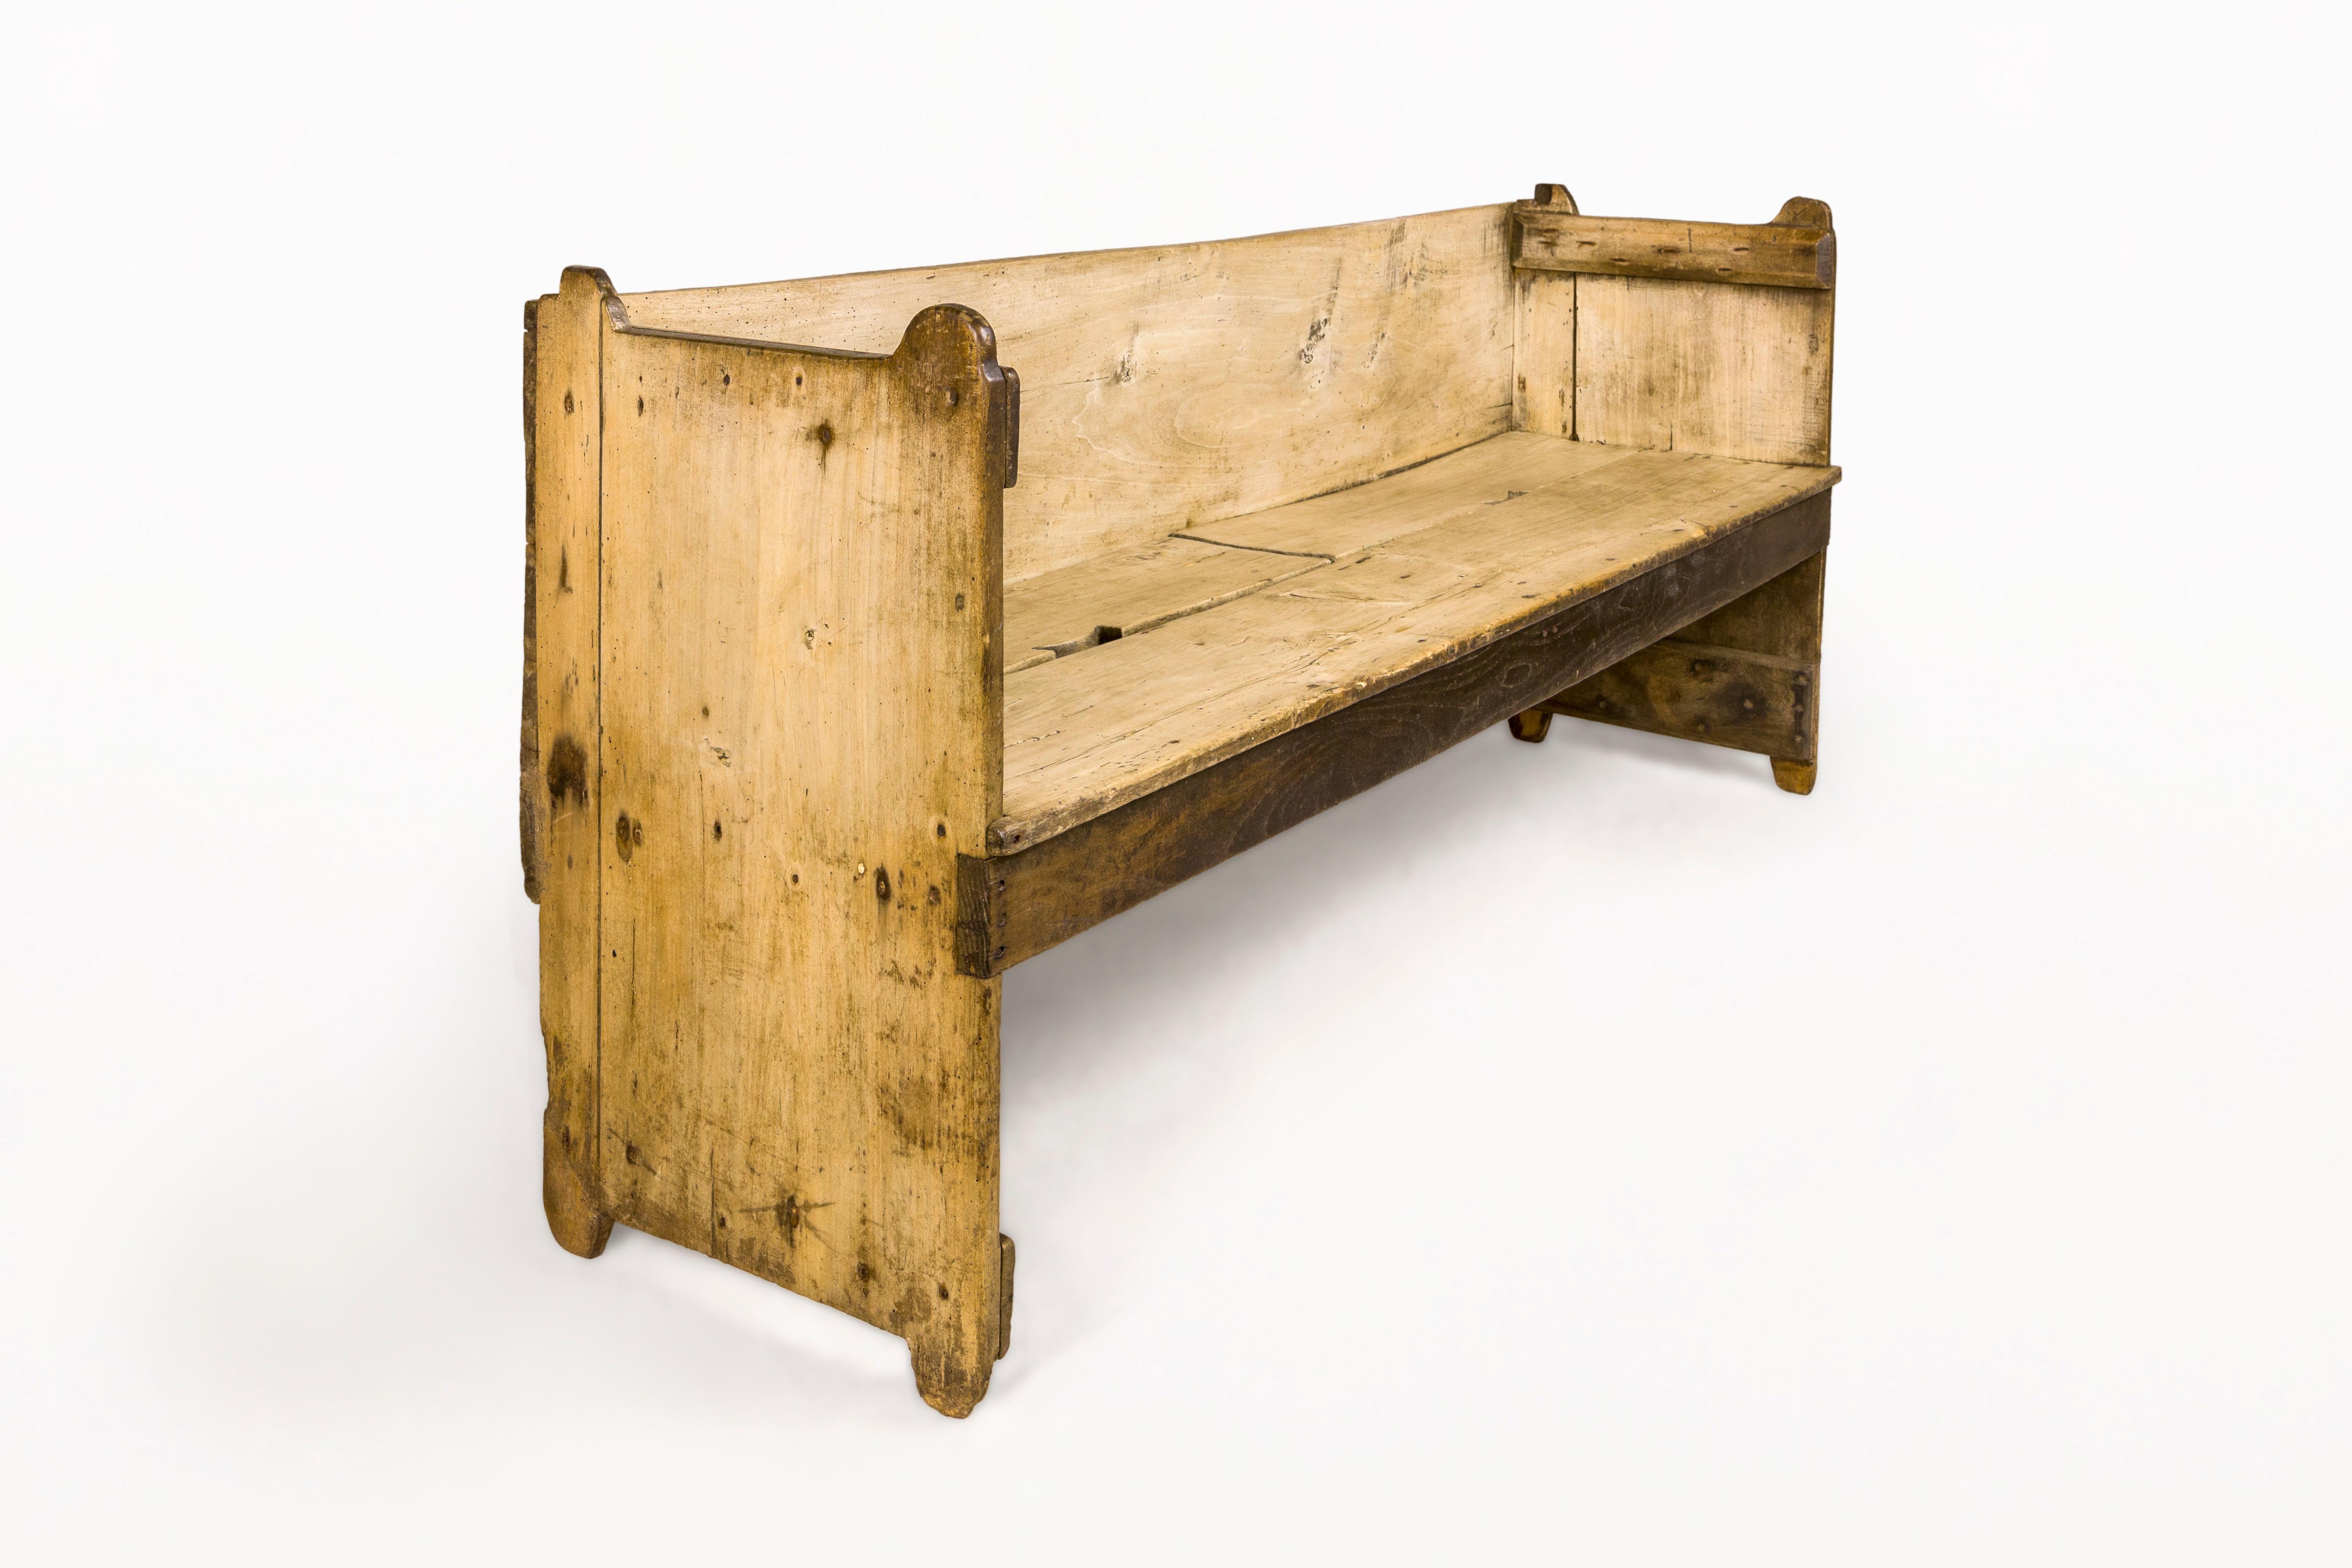 DESCRIPTION: Late 19th Century Rustic Spanish Pyreneese Mountains Wooden Bench.  Made with wood. Very decorative piece.

CONDITION: Very good vintage condition.

DIMENSIONS: Height: 80cm (31.50in) Width: 181cm (71.26in) Depth: 48cm (18.90in) Seat